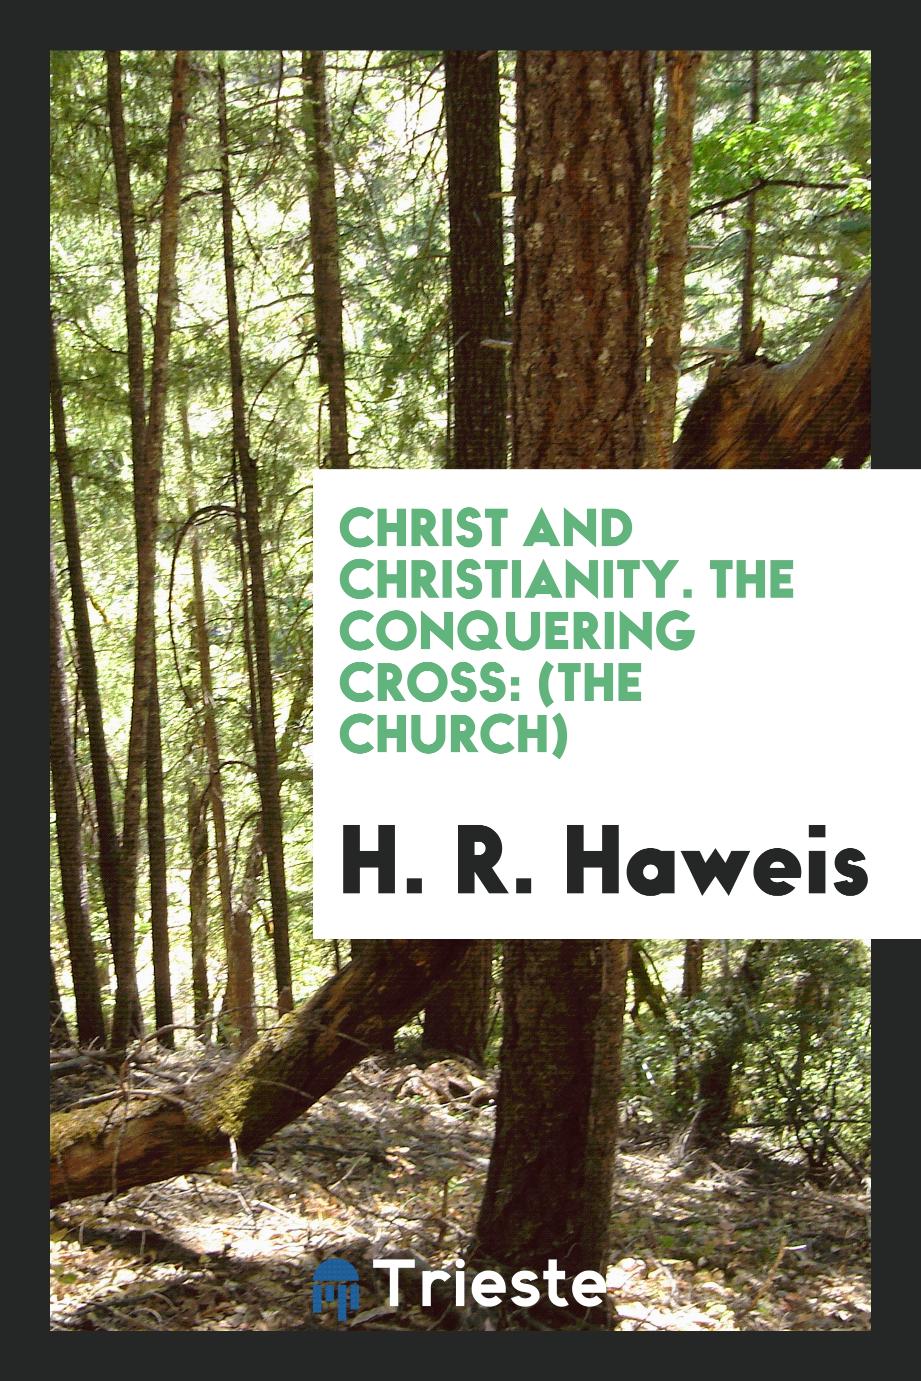 Christ and Christianity. The Conquering Cross: (The Church)